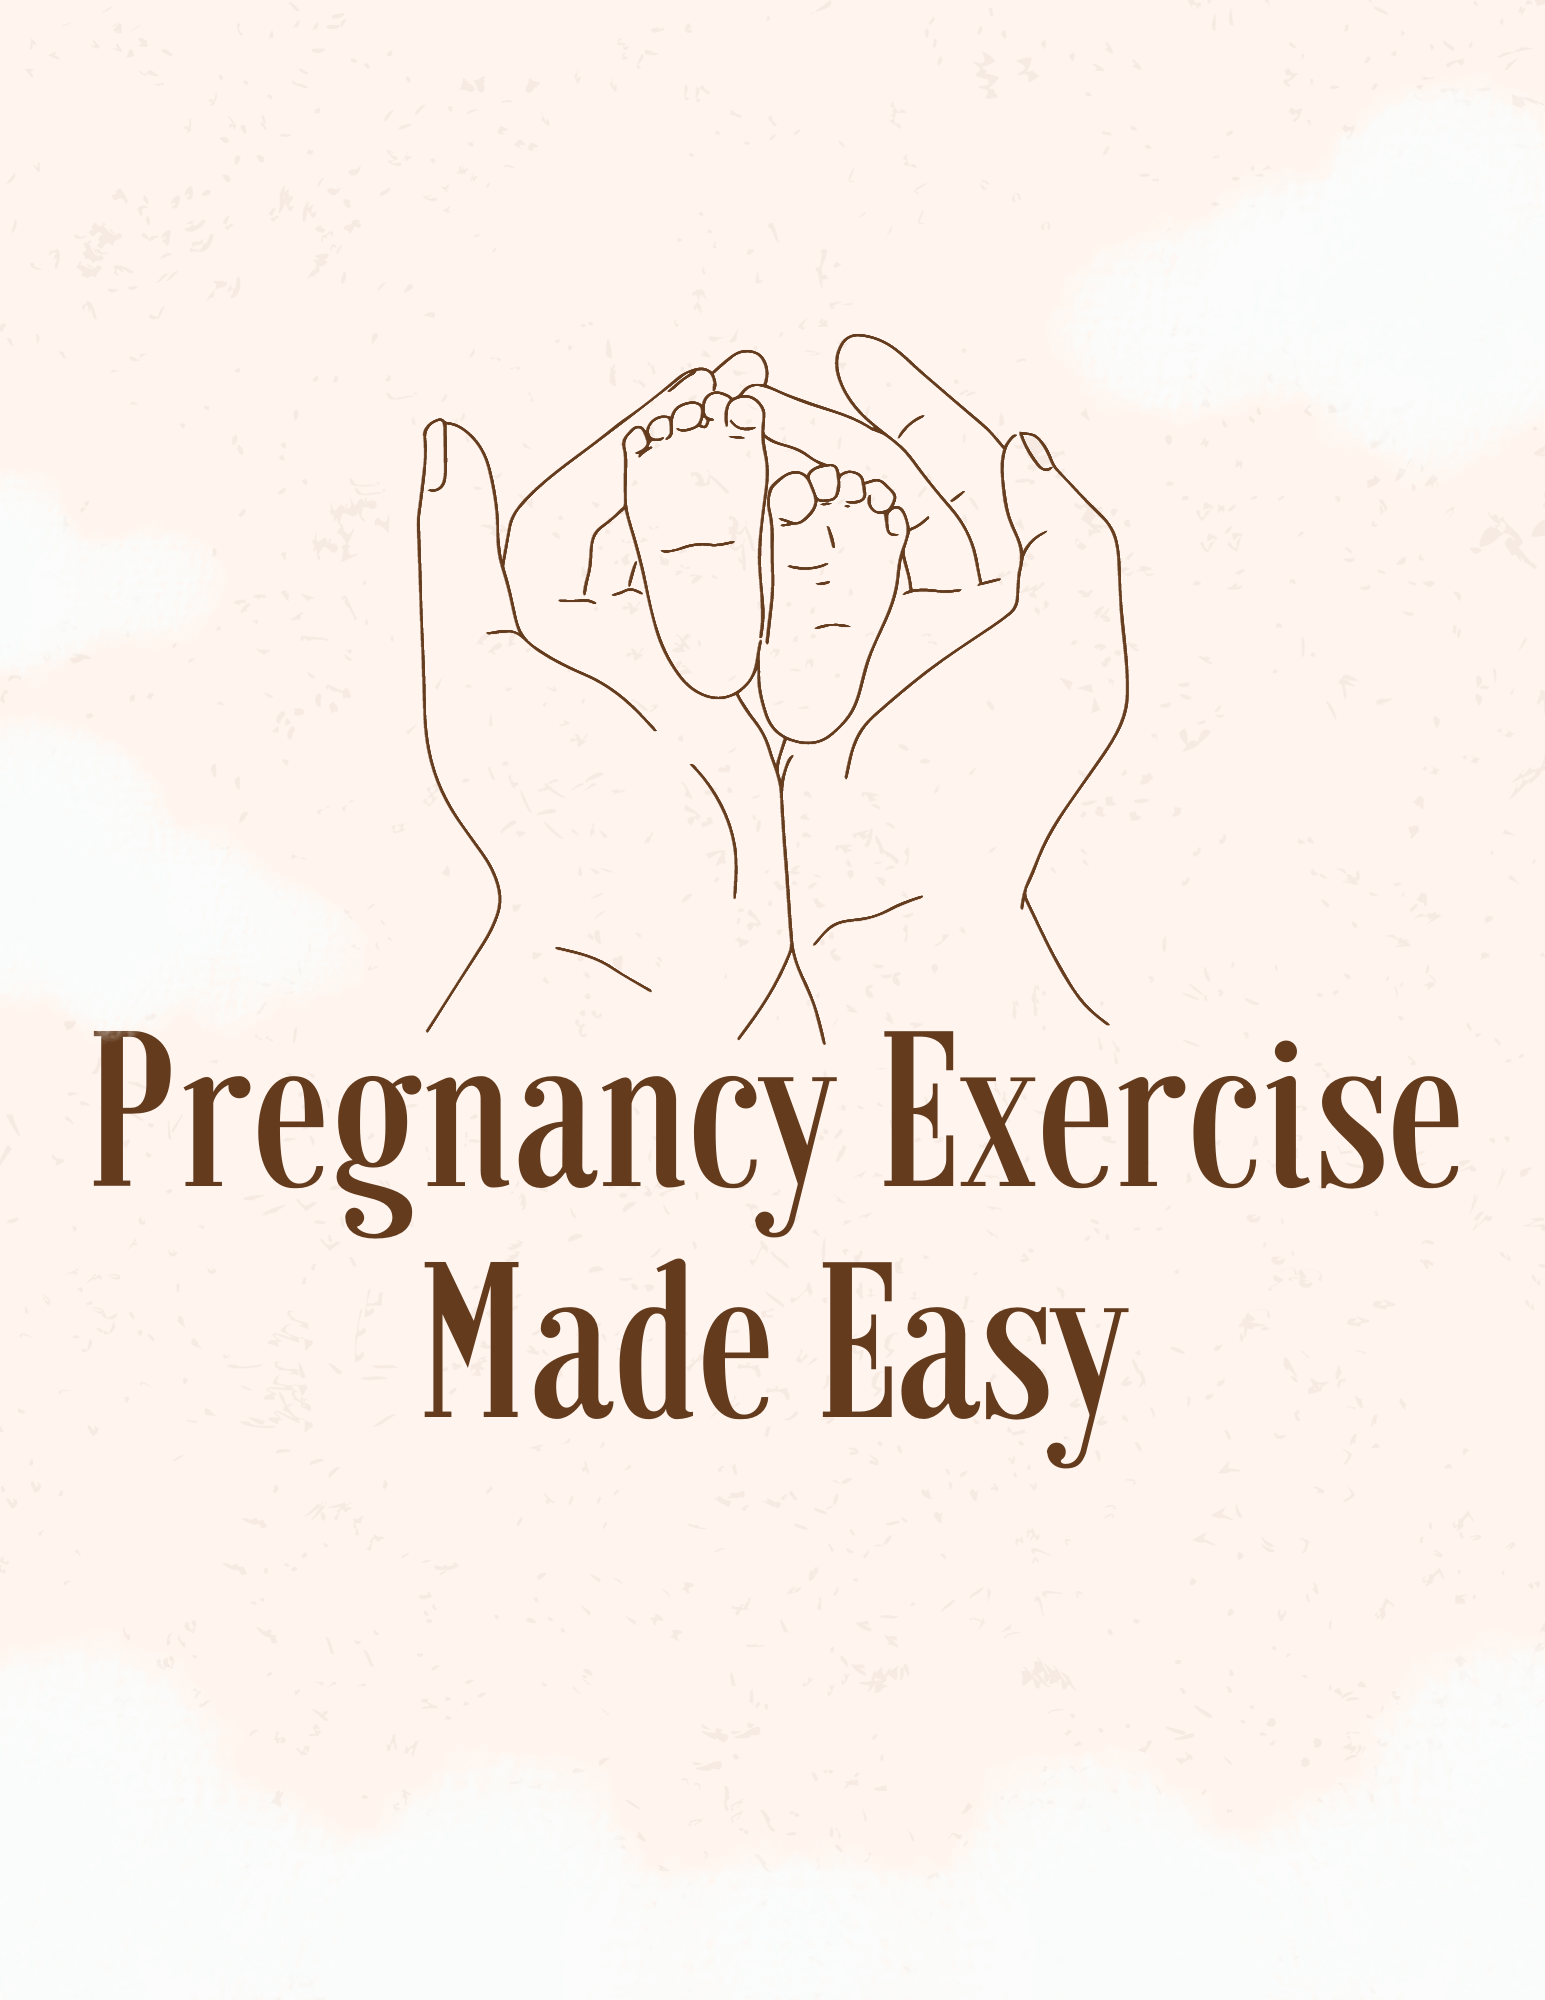 Pregnancy Exercise Made Easy